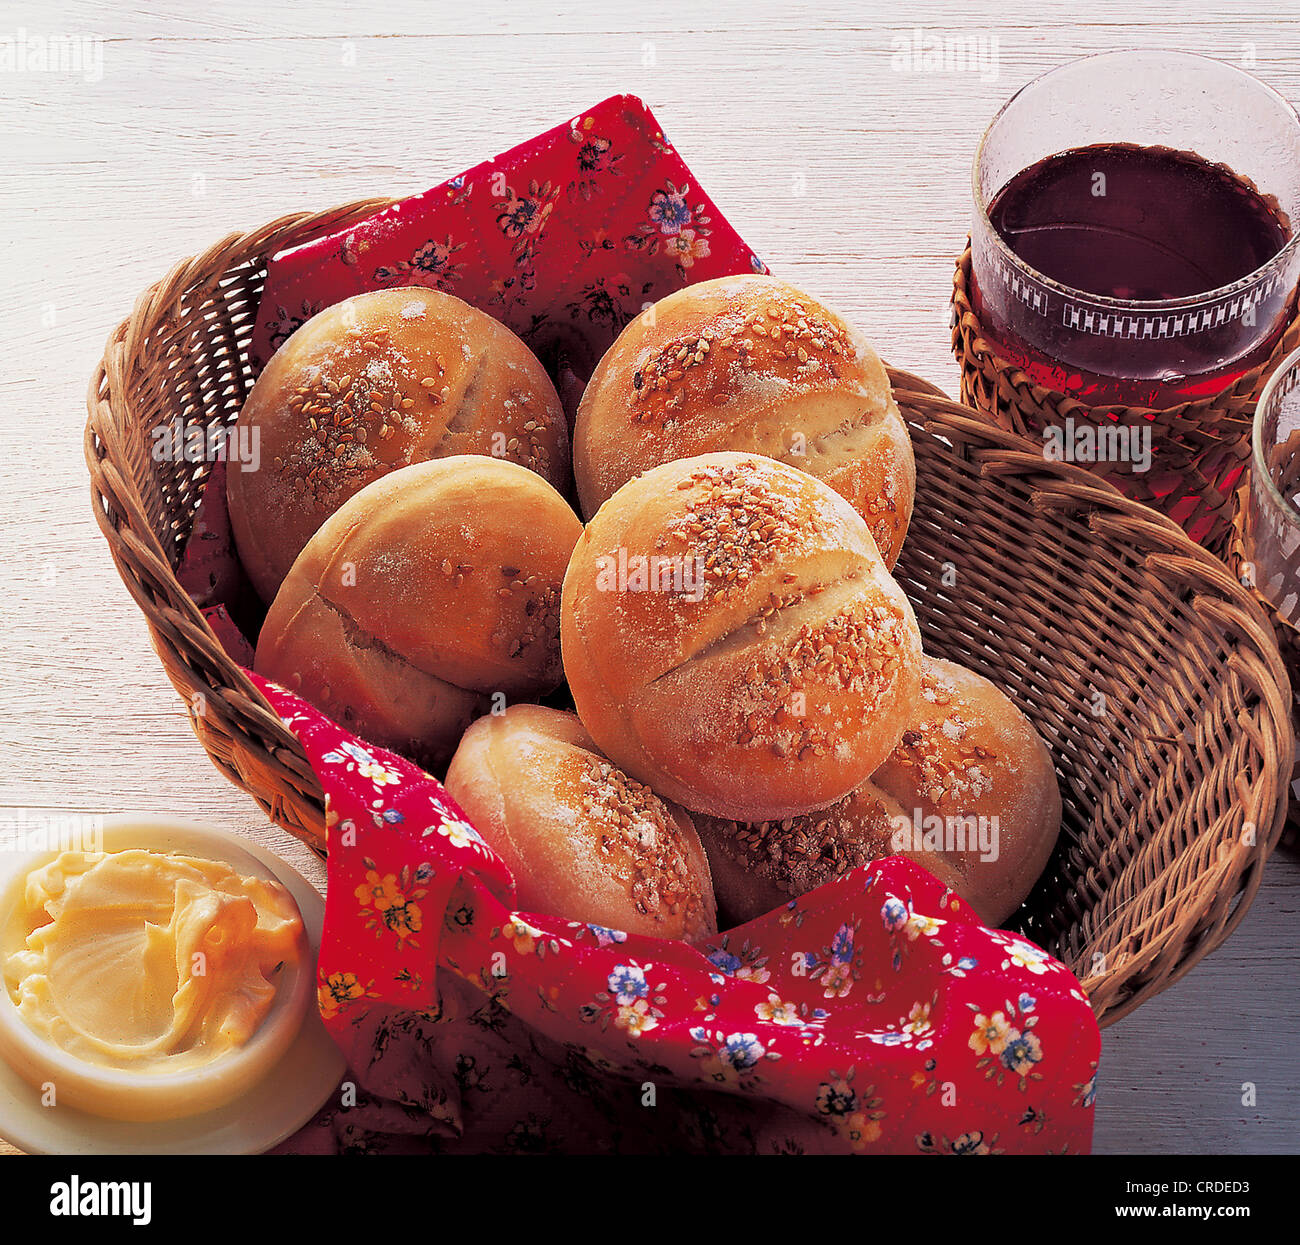 Delicate butter bread rolls, Hungary. Stock Photo